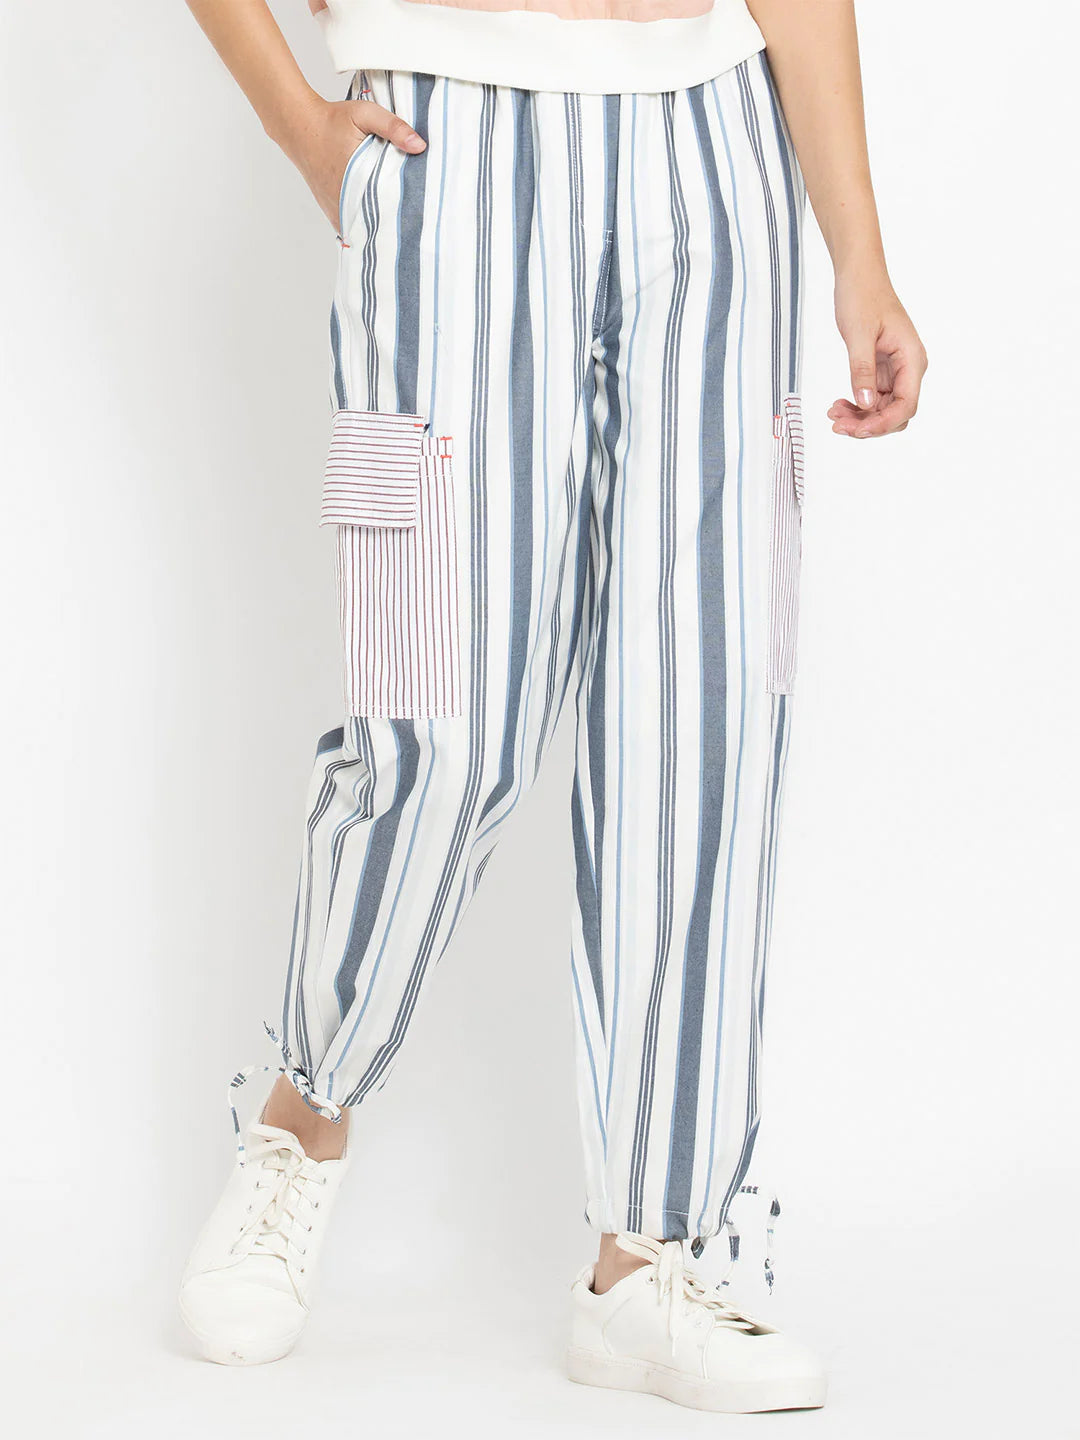 Striped Jogger Pants for Women | Chic Striped Jogger Pants